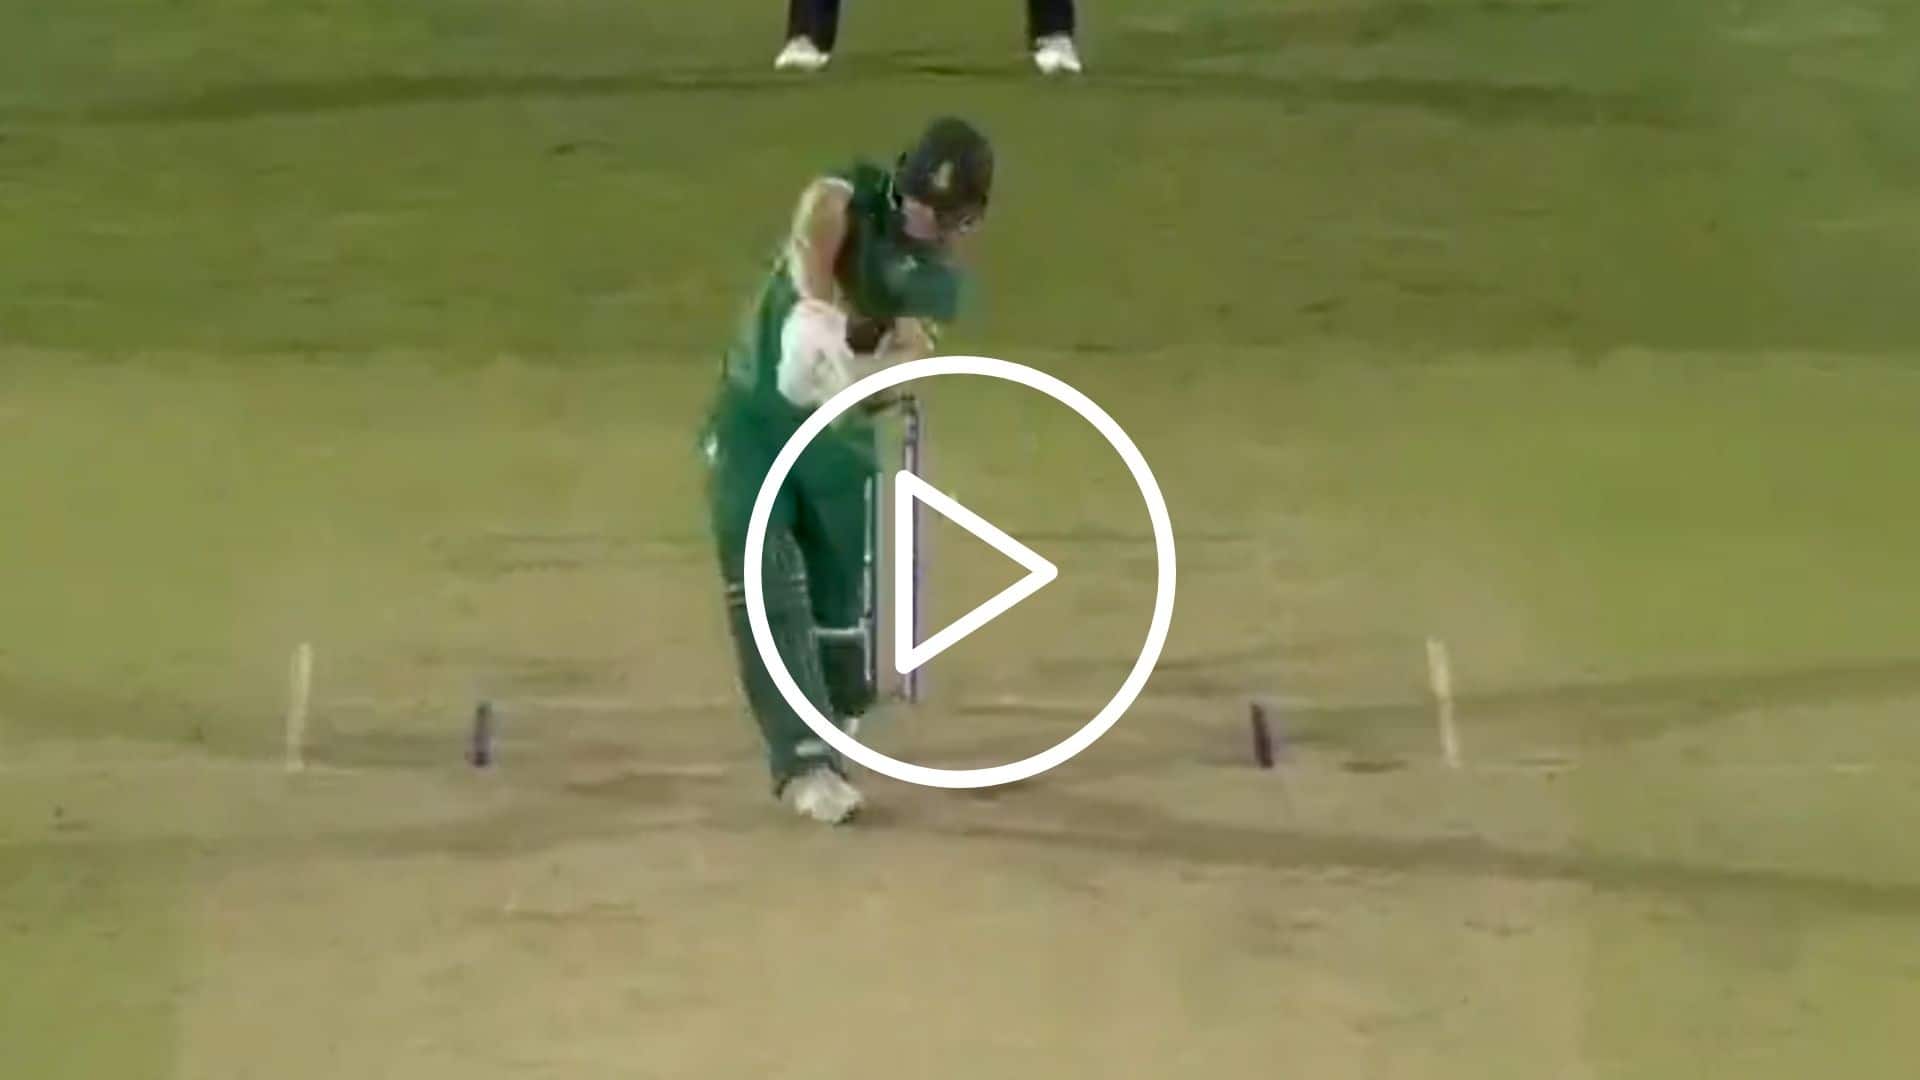 [Watch] South African Hopes Shattered As David Miller Gets Cleaned Up By Magical Delivery